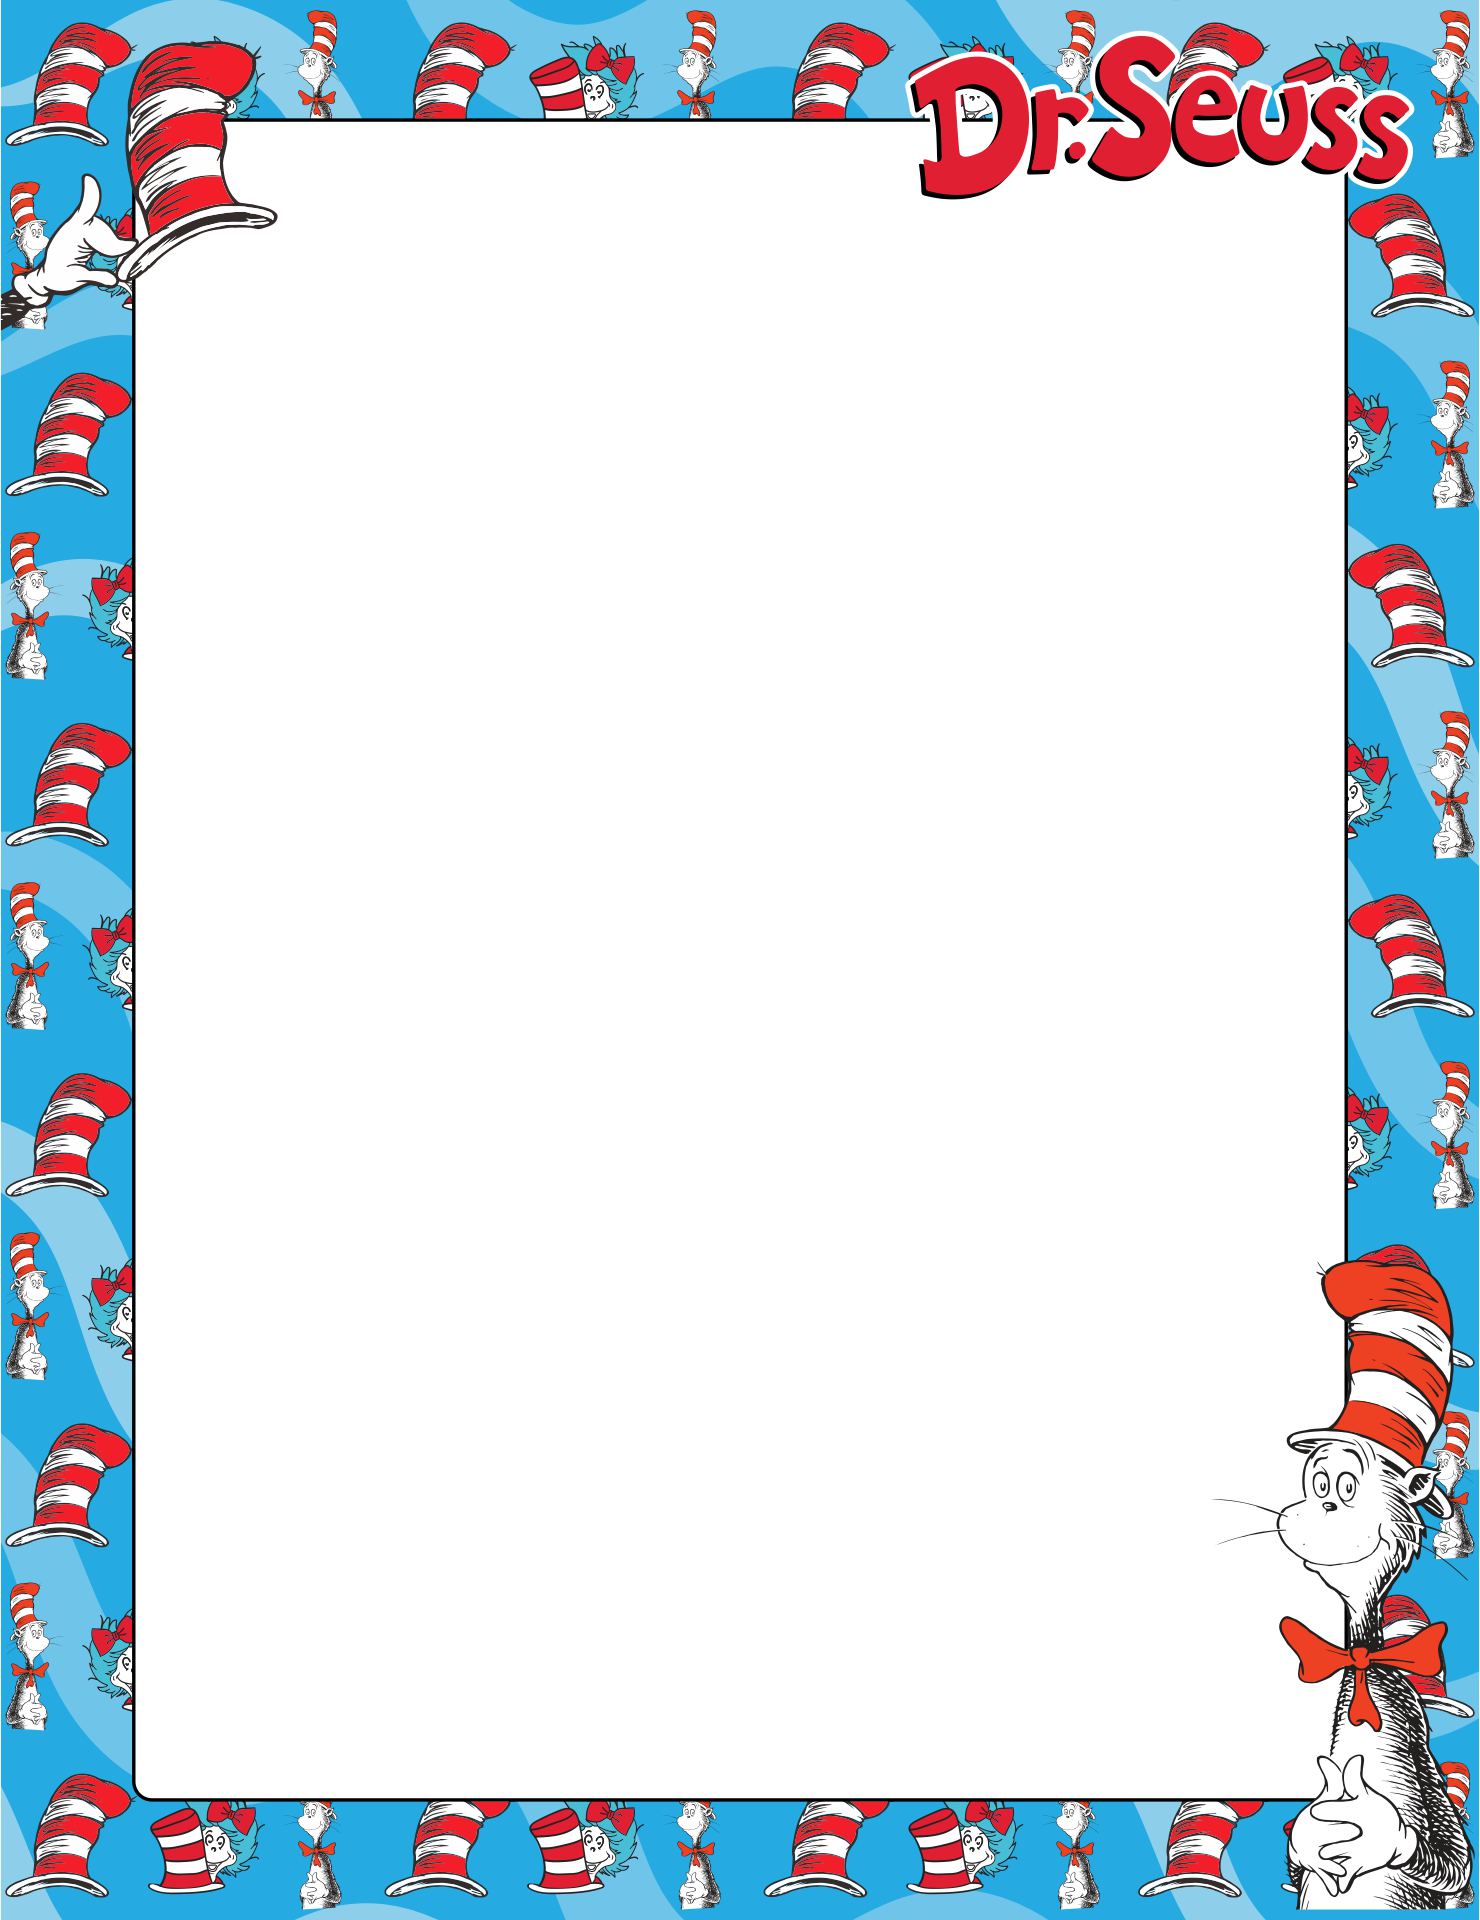 Dr. Seuss The Cat In The Hat Border